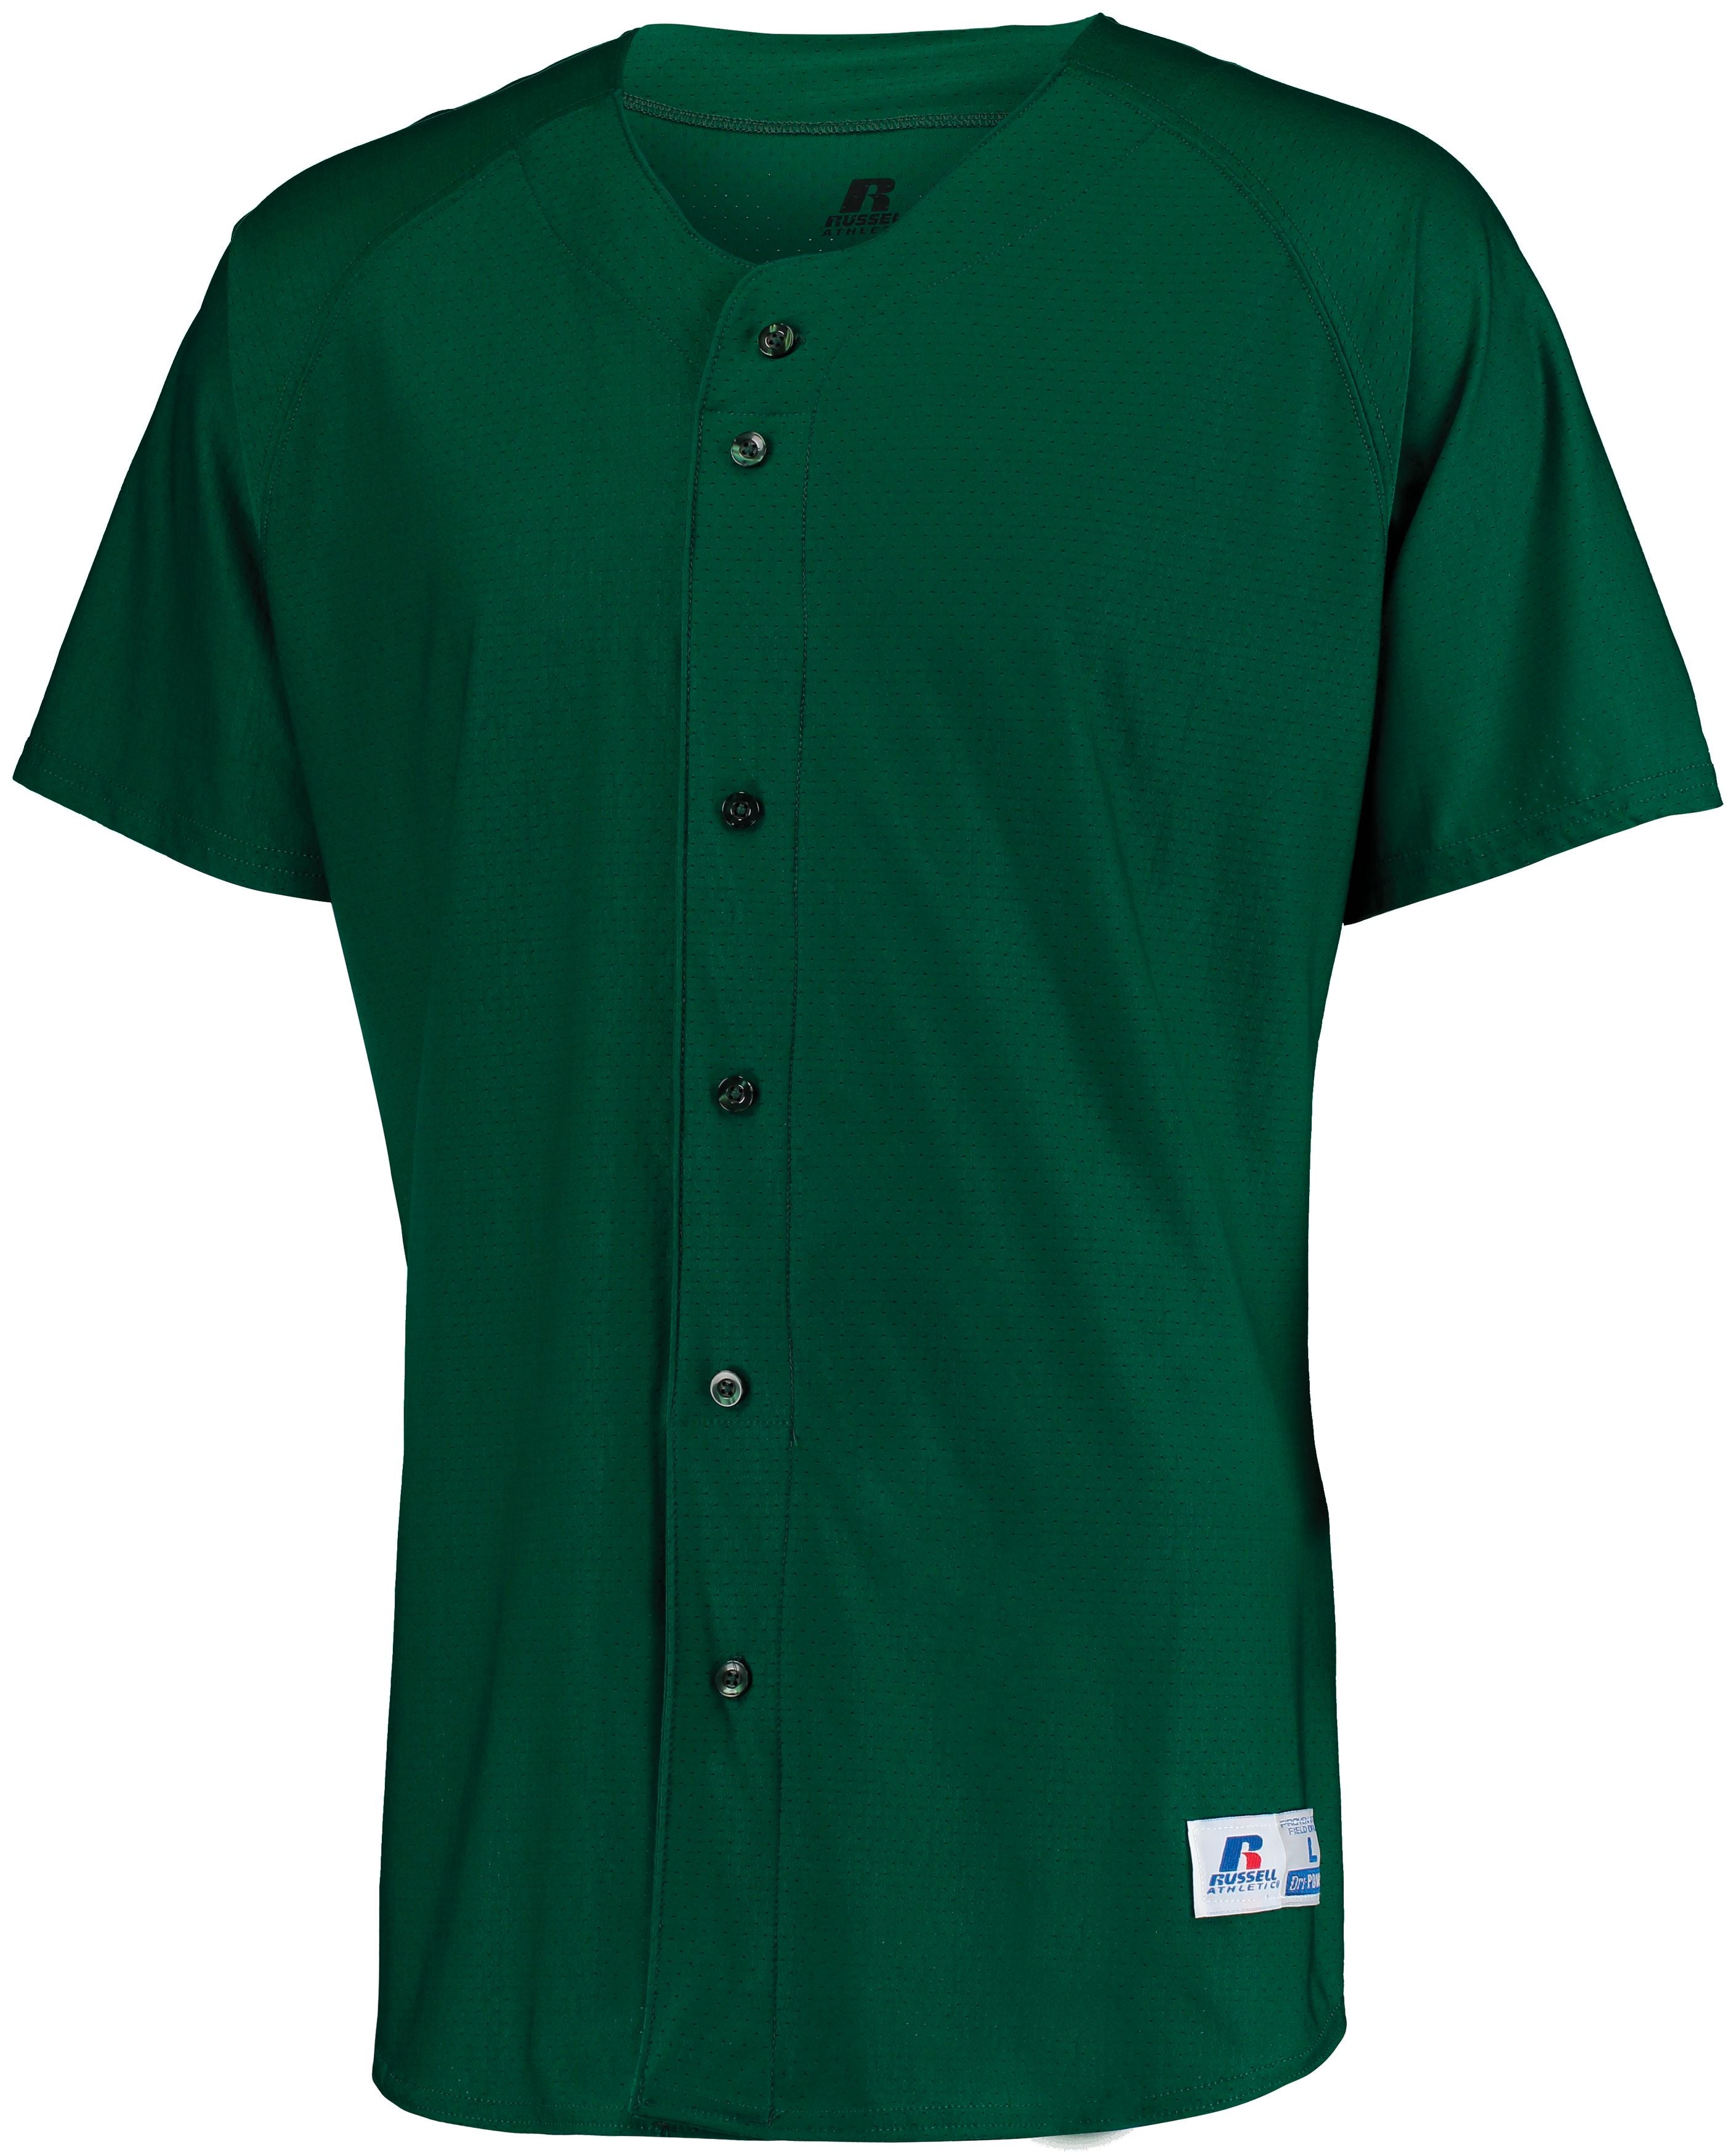 Russell Athletic Raglan Sleeve Button Front Jersey in Dark Green  -Part of the Adult, Adult-Jersey, Baseball, Russell-Athletic-Products, Shirts, All-Sports, All-Sports-1 product lines at KanaleyCreations.com